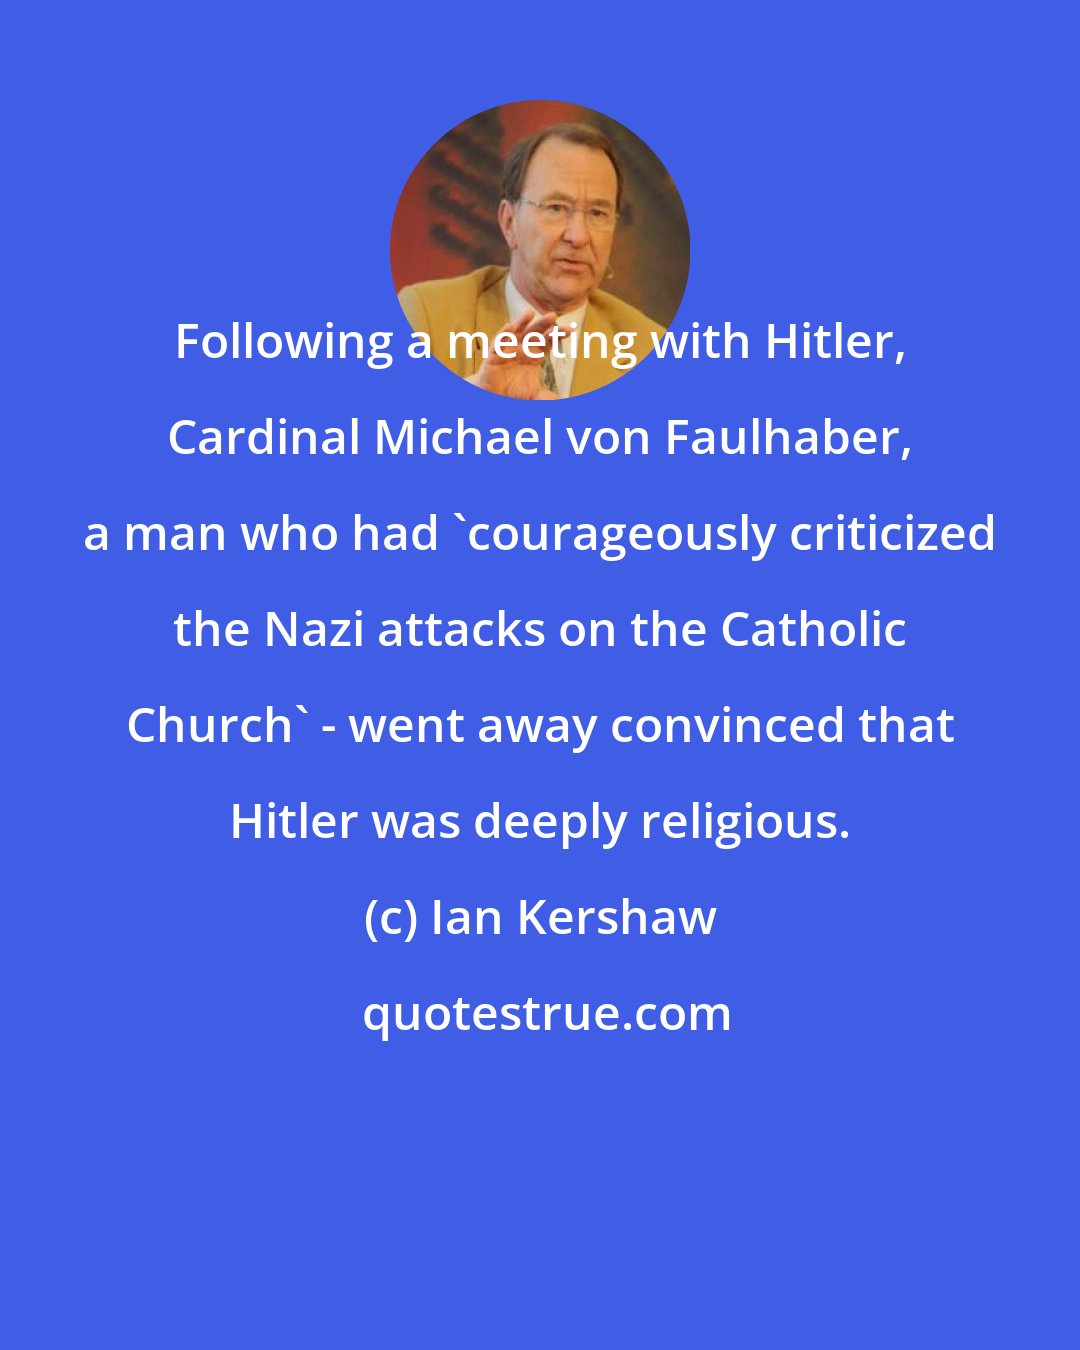 Ian Kershaw: Following a meeting with Hitler, Cardinal Michael von Faulhaber, a man who had 'courageously criticized the Nazi attacks on the Catholic Church' - went away convinced that Hitler was deeply religious.